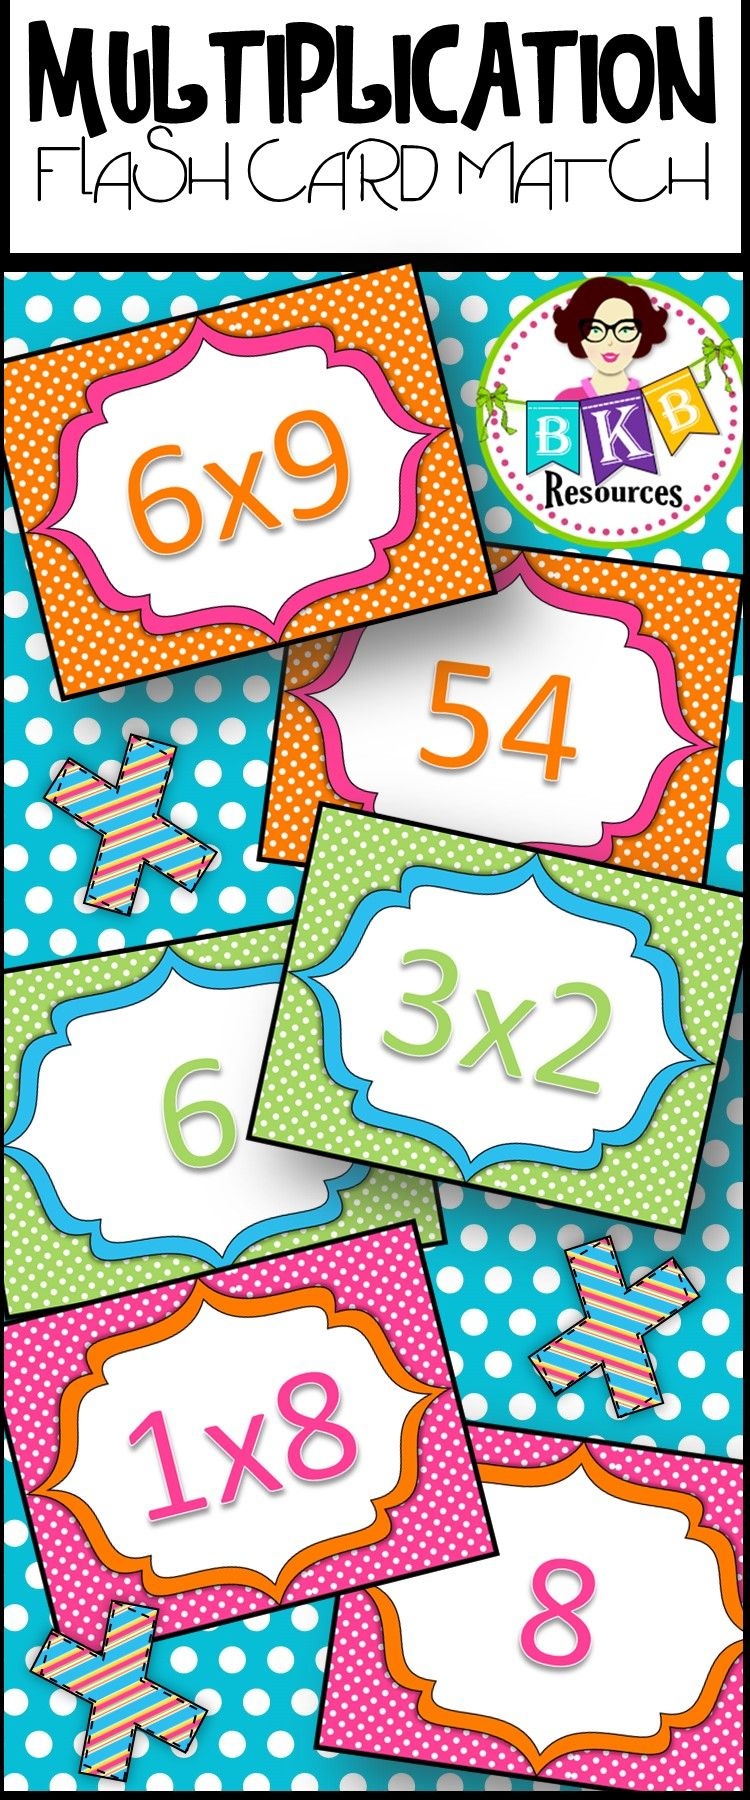 printable-multiplication-cards